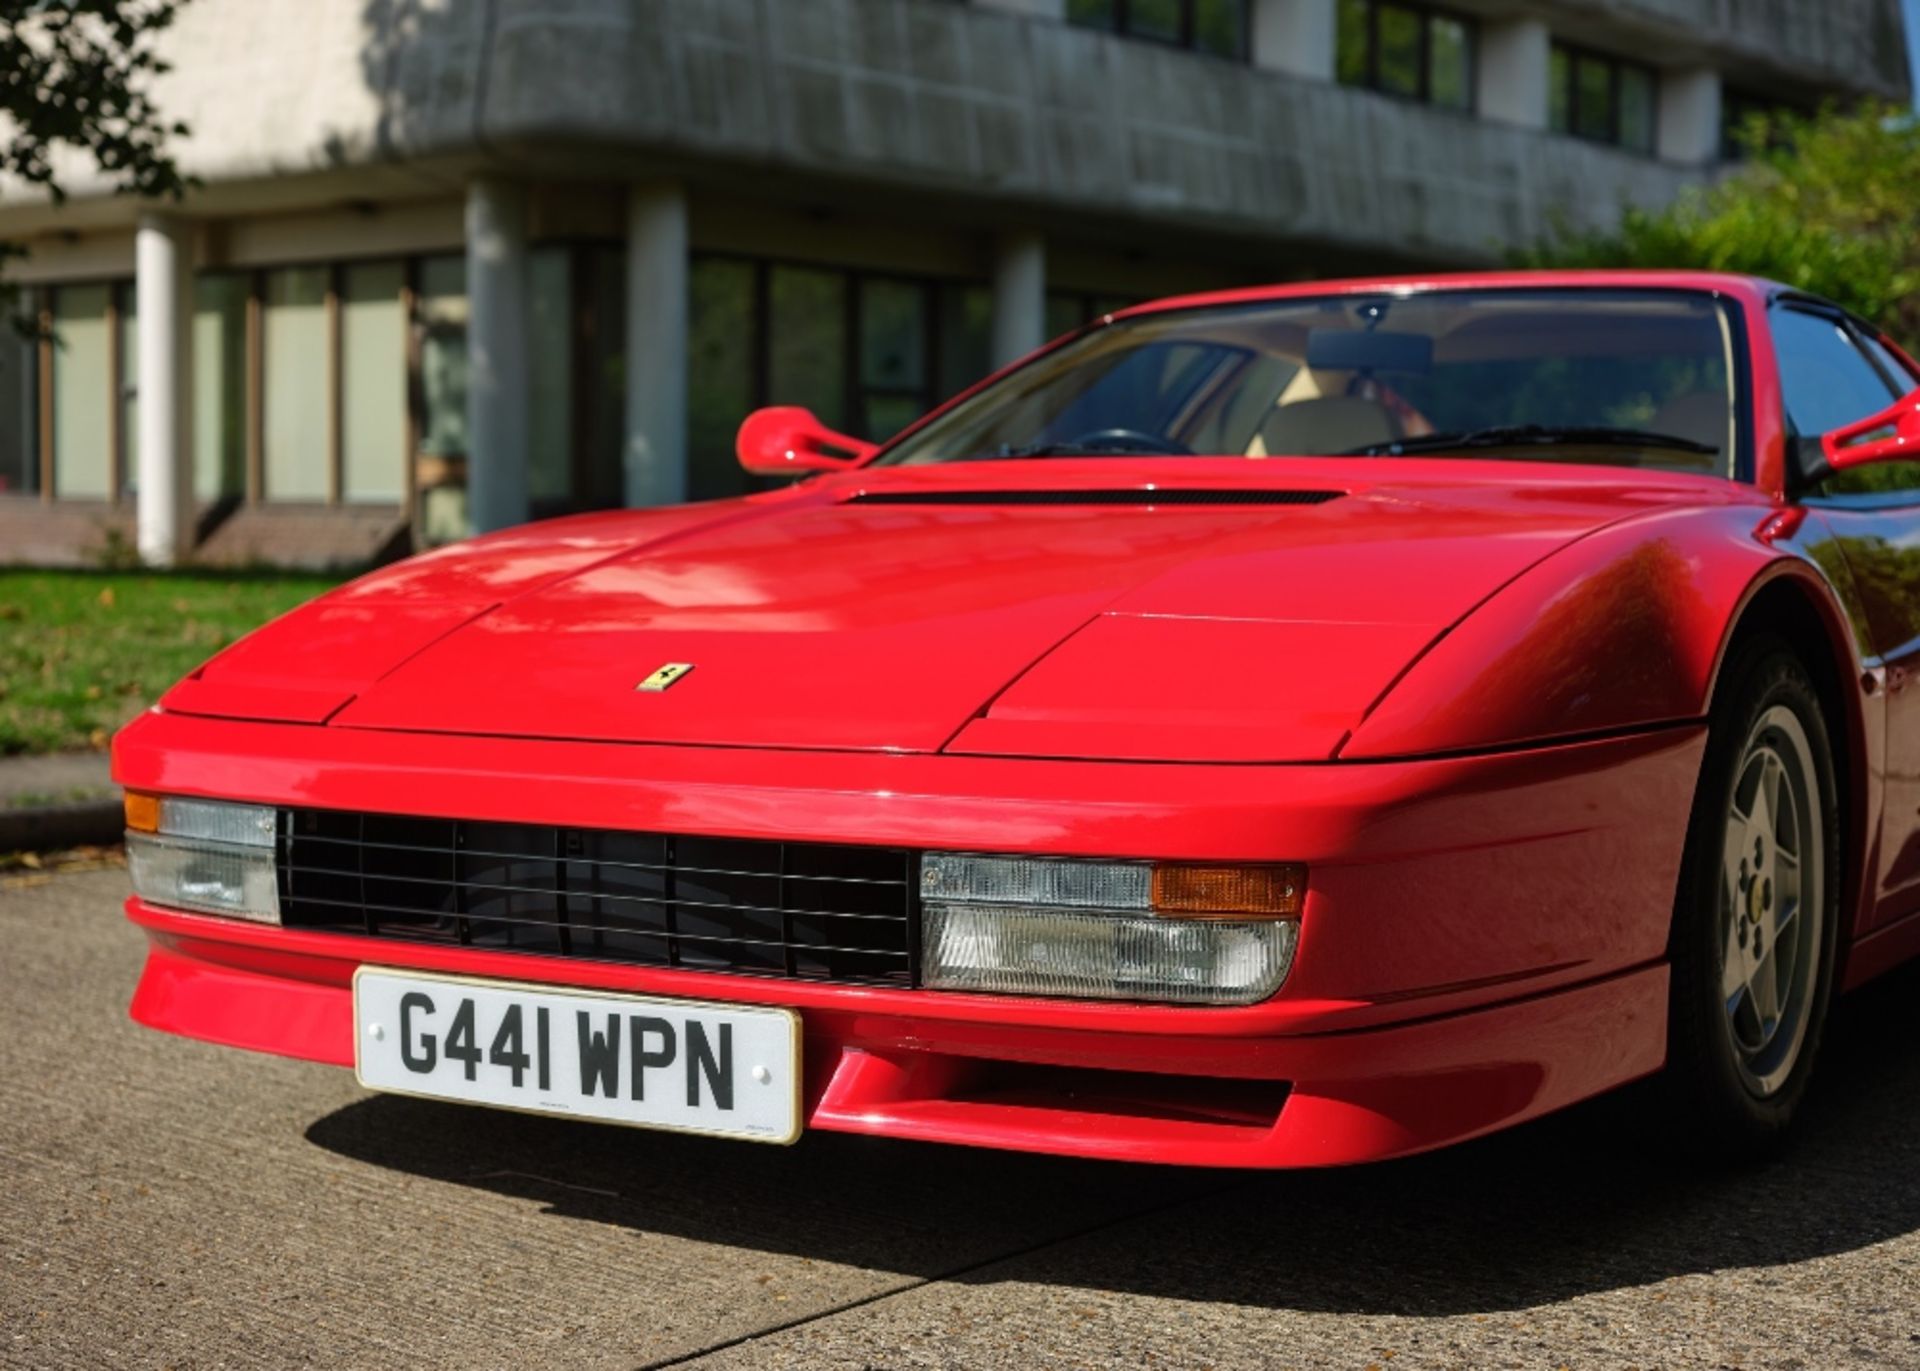 1989 FERRARI TESTAROSSA Registration Number: G441 WPN Chassis Number: ZFFAA17C000082817 Recorded - Image 4 of 59